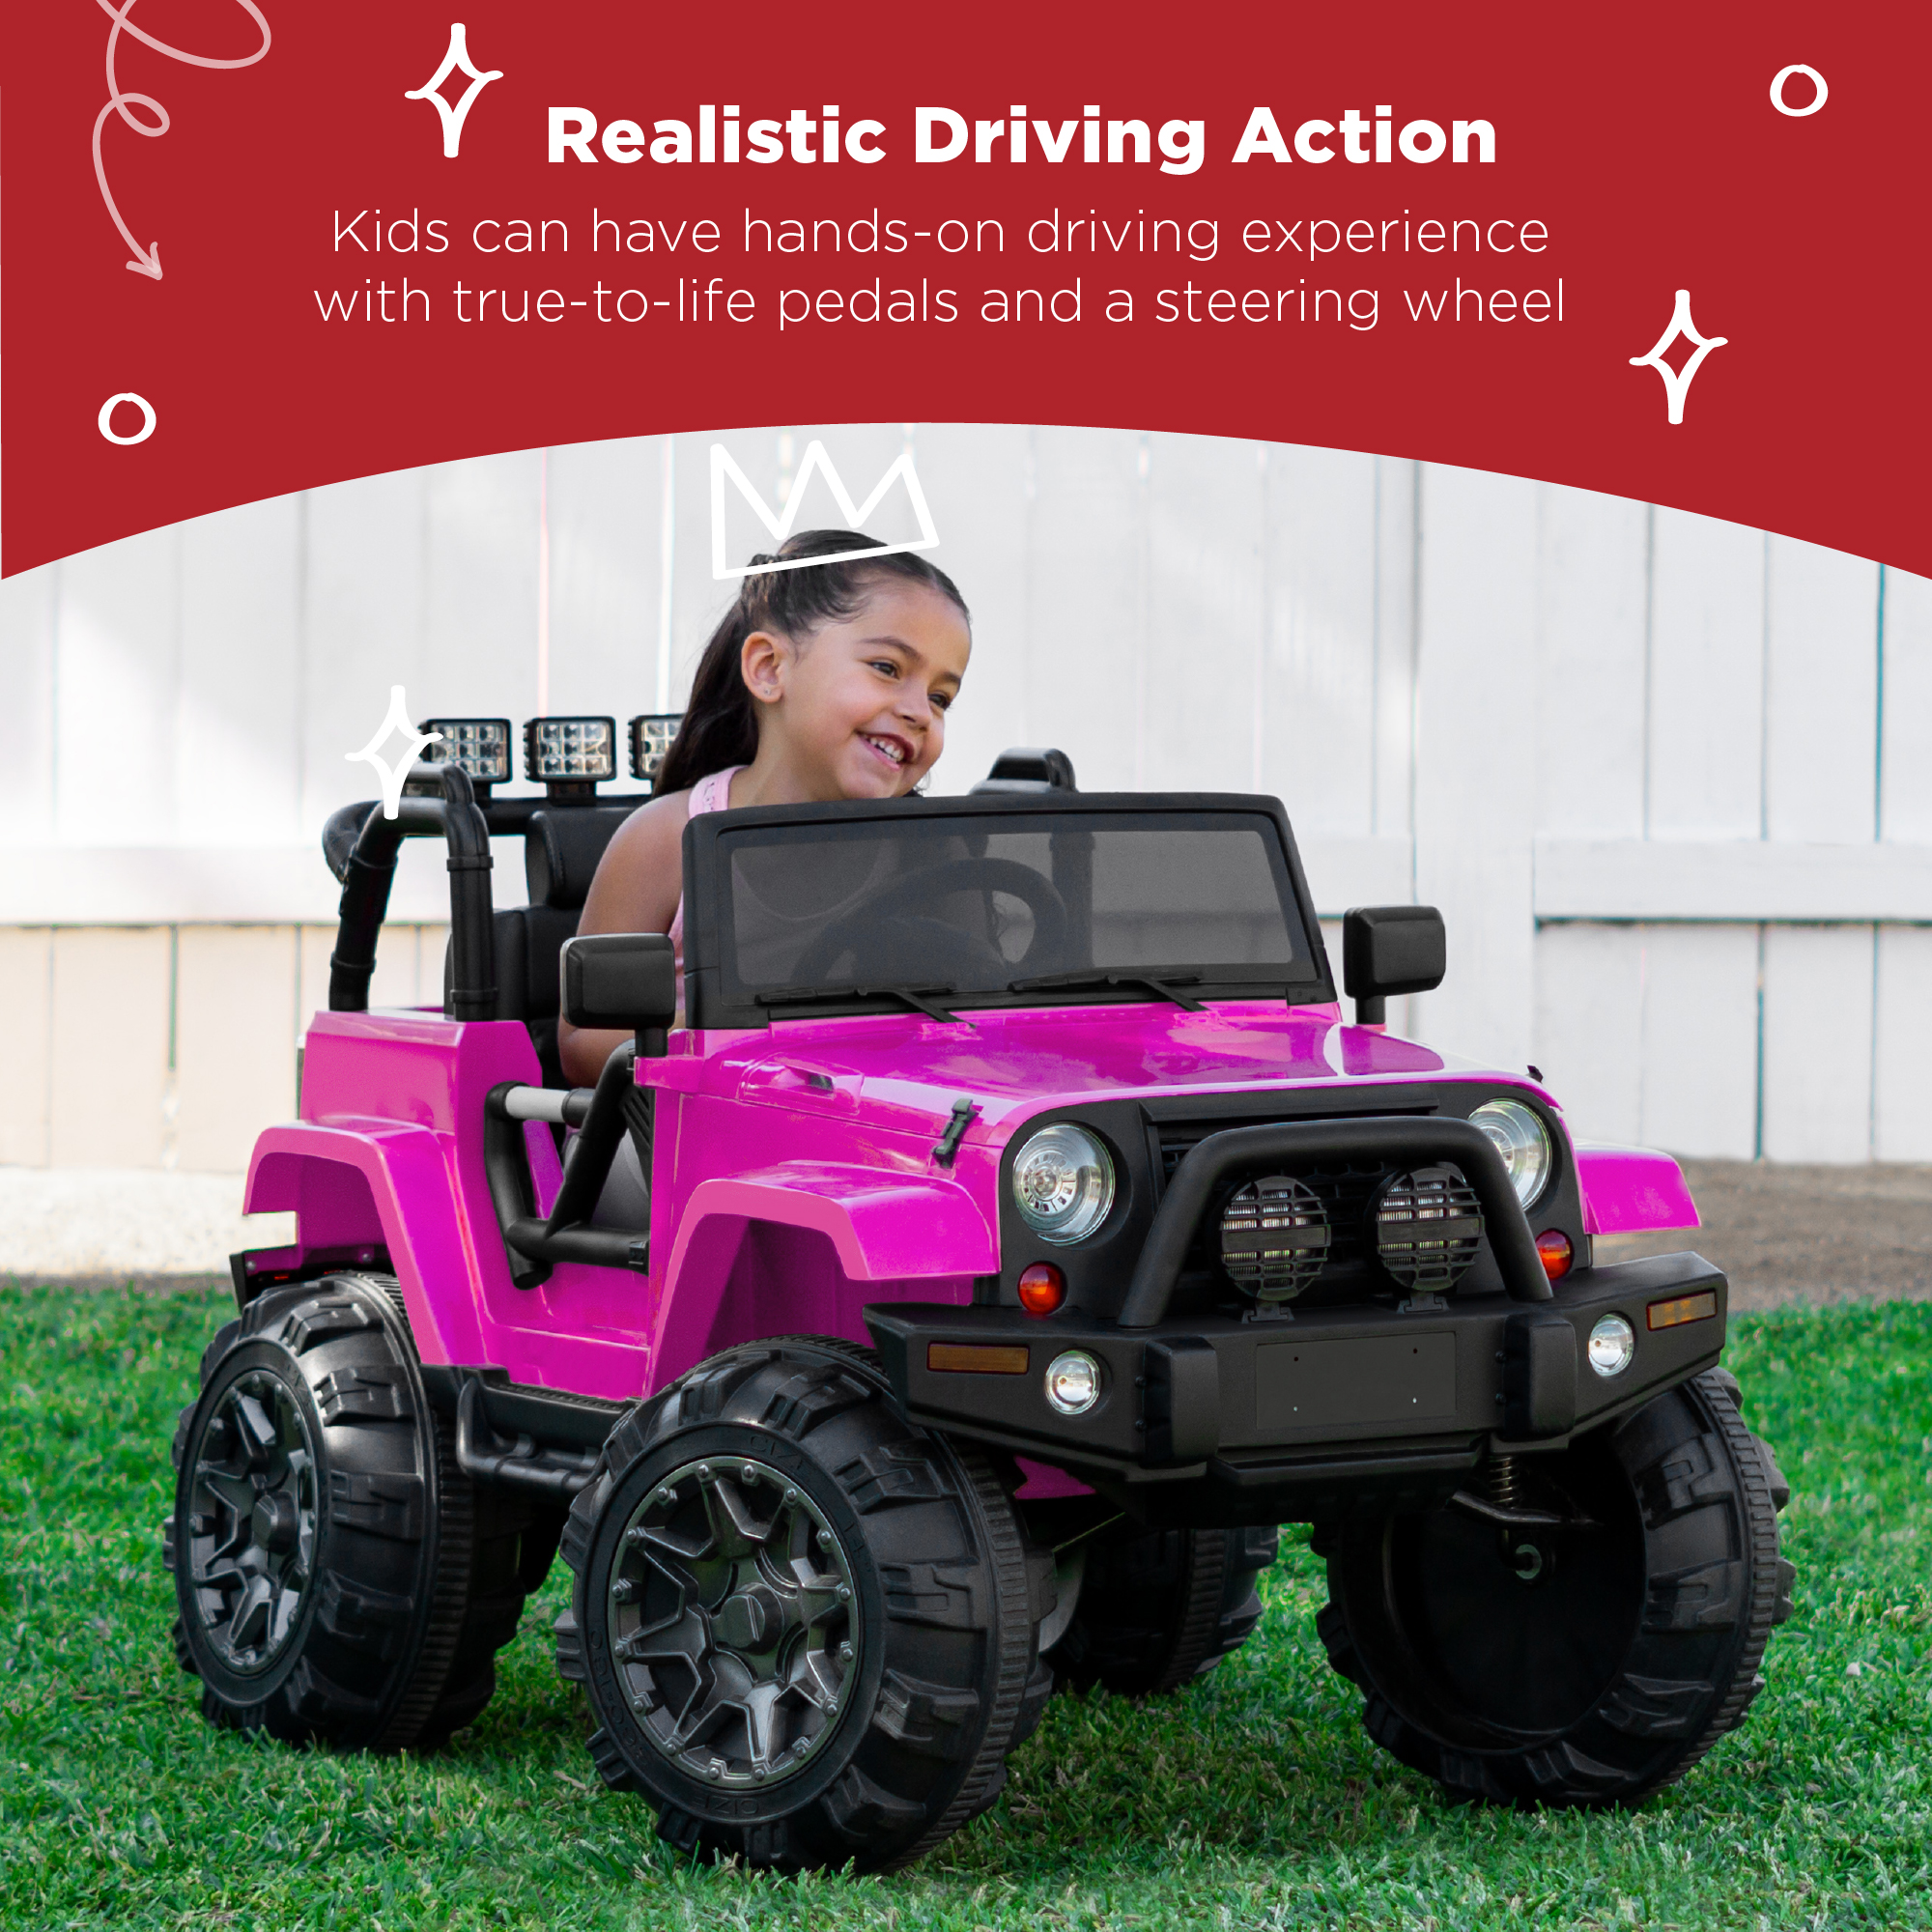 Best Choice Products 12V Kids Ride On Truck Car w/ Remote Control, Spring Suspension, Bluetooth, LED Lights - Pink - image 3 of 9